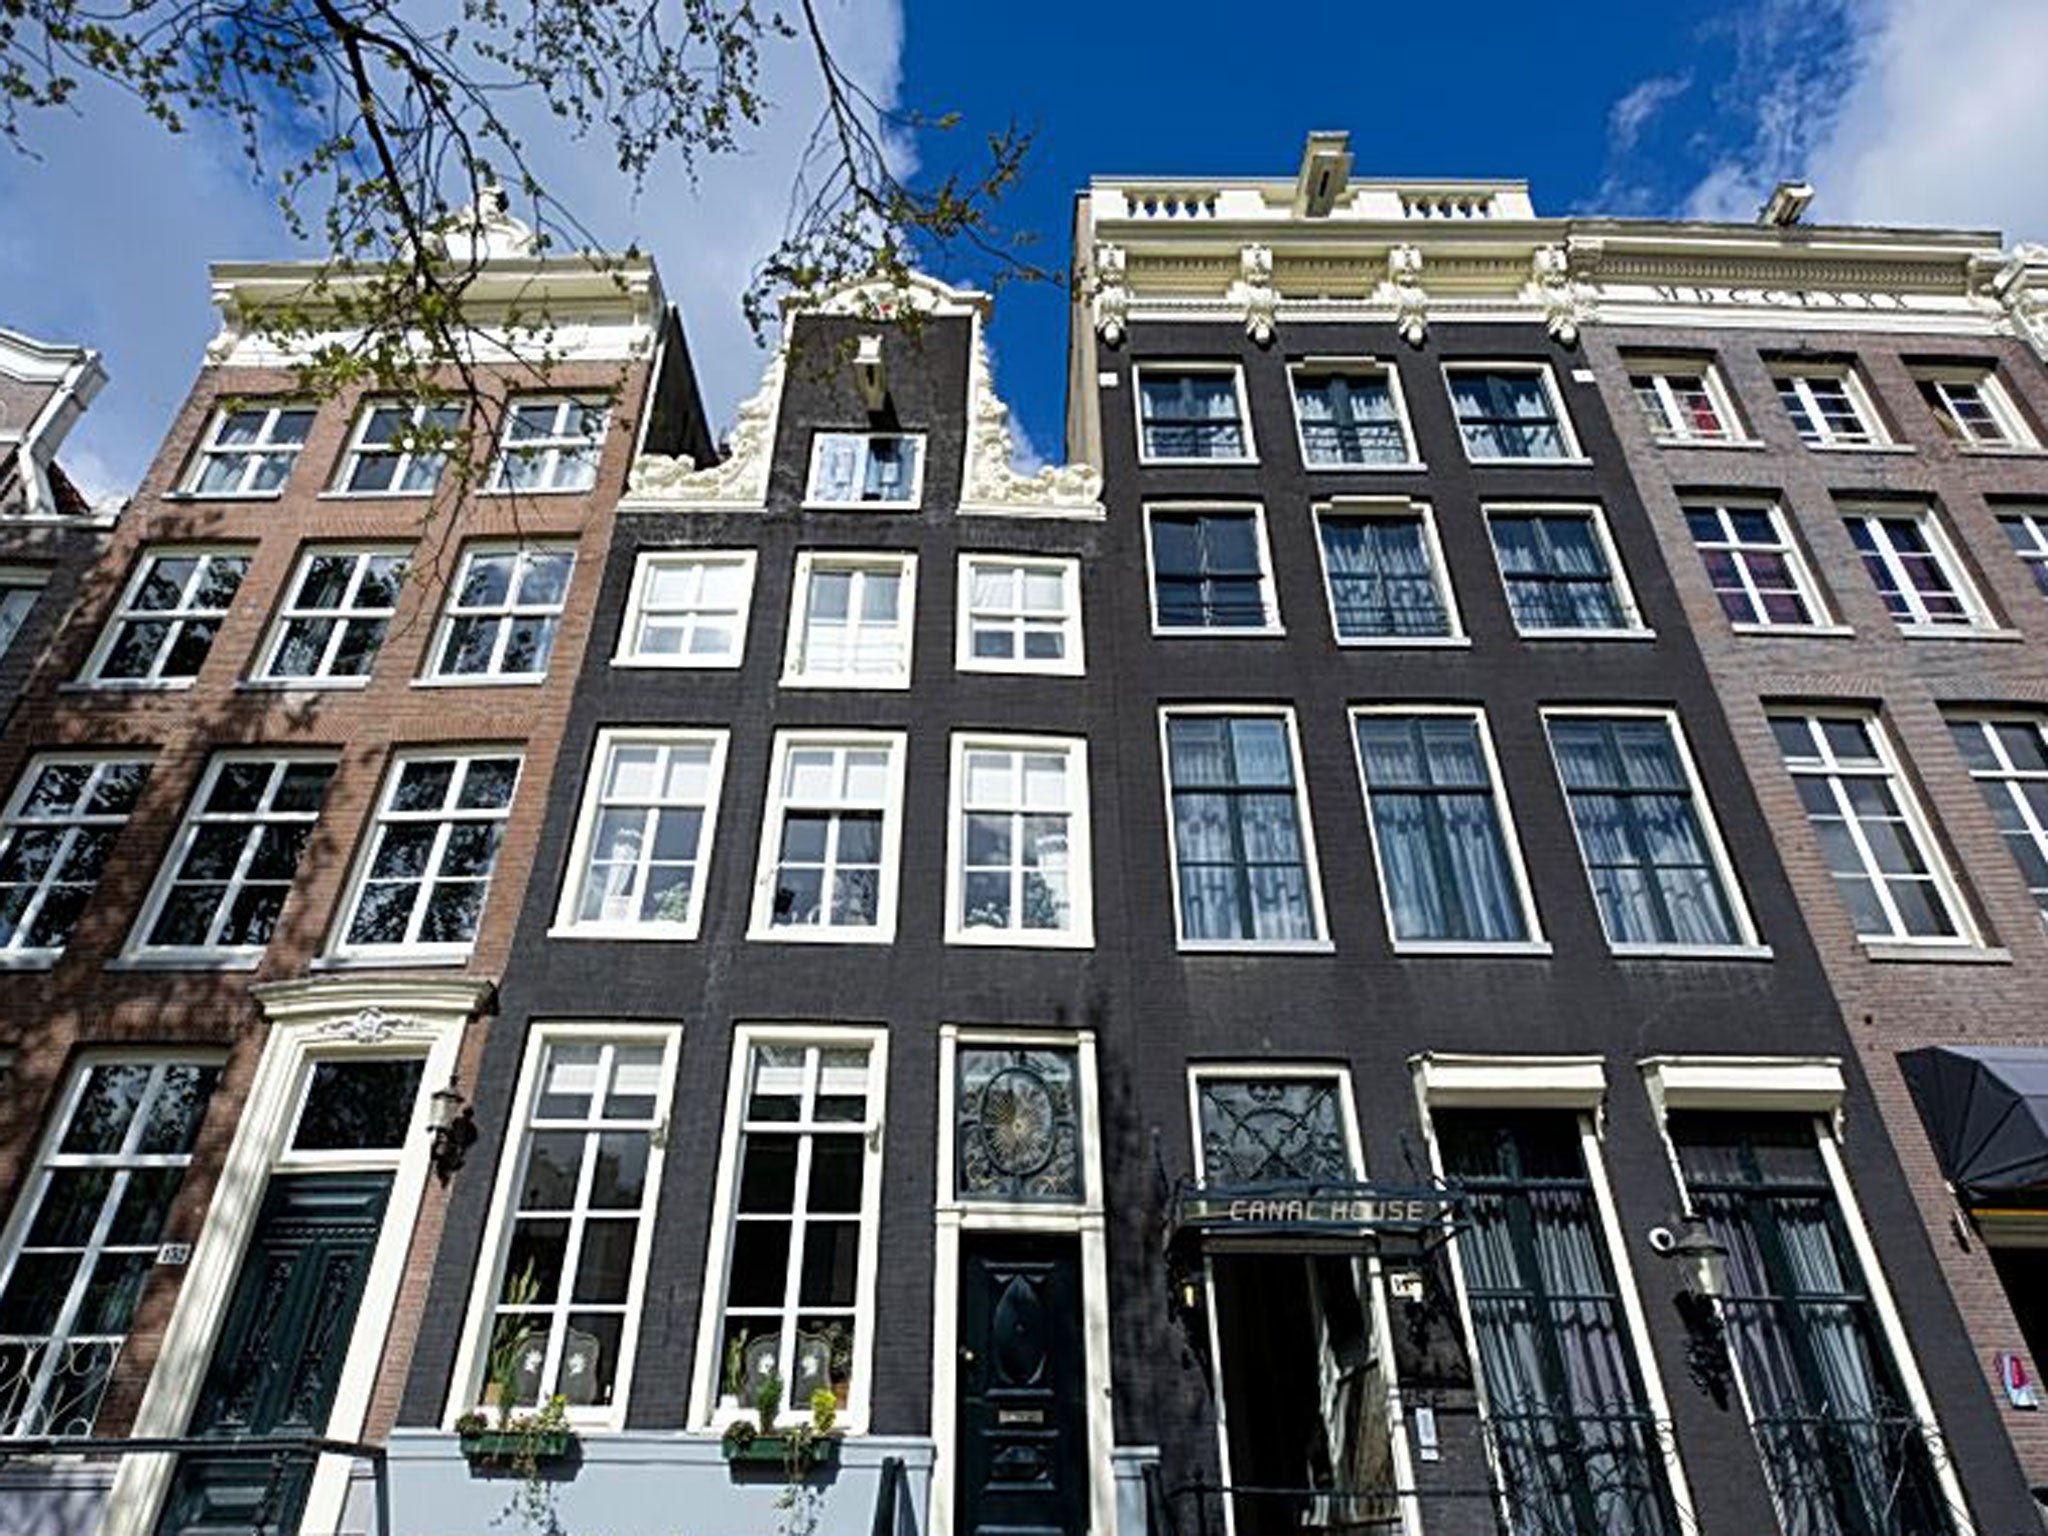 Tall order: impressive canal-side buildings in Amsterdam